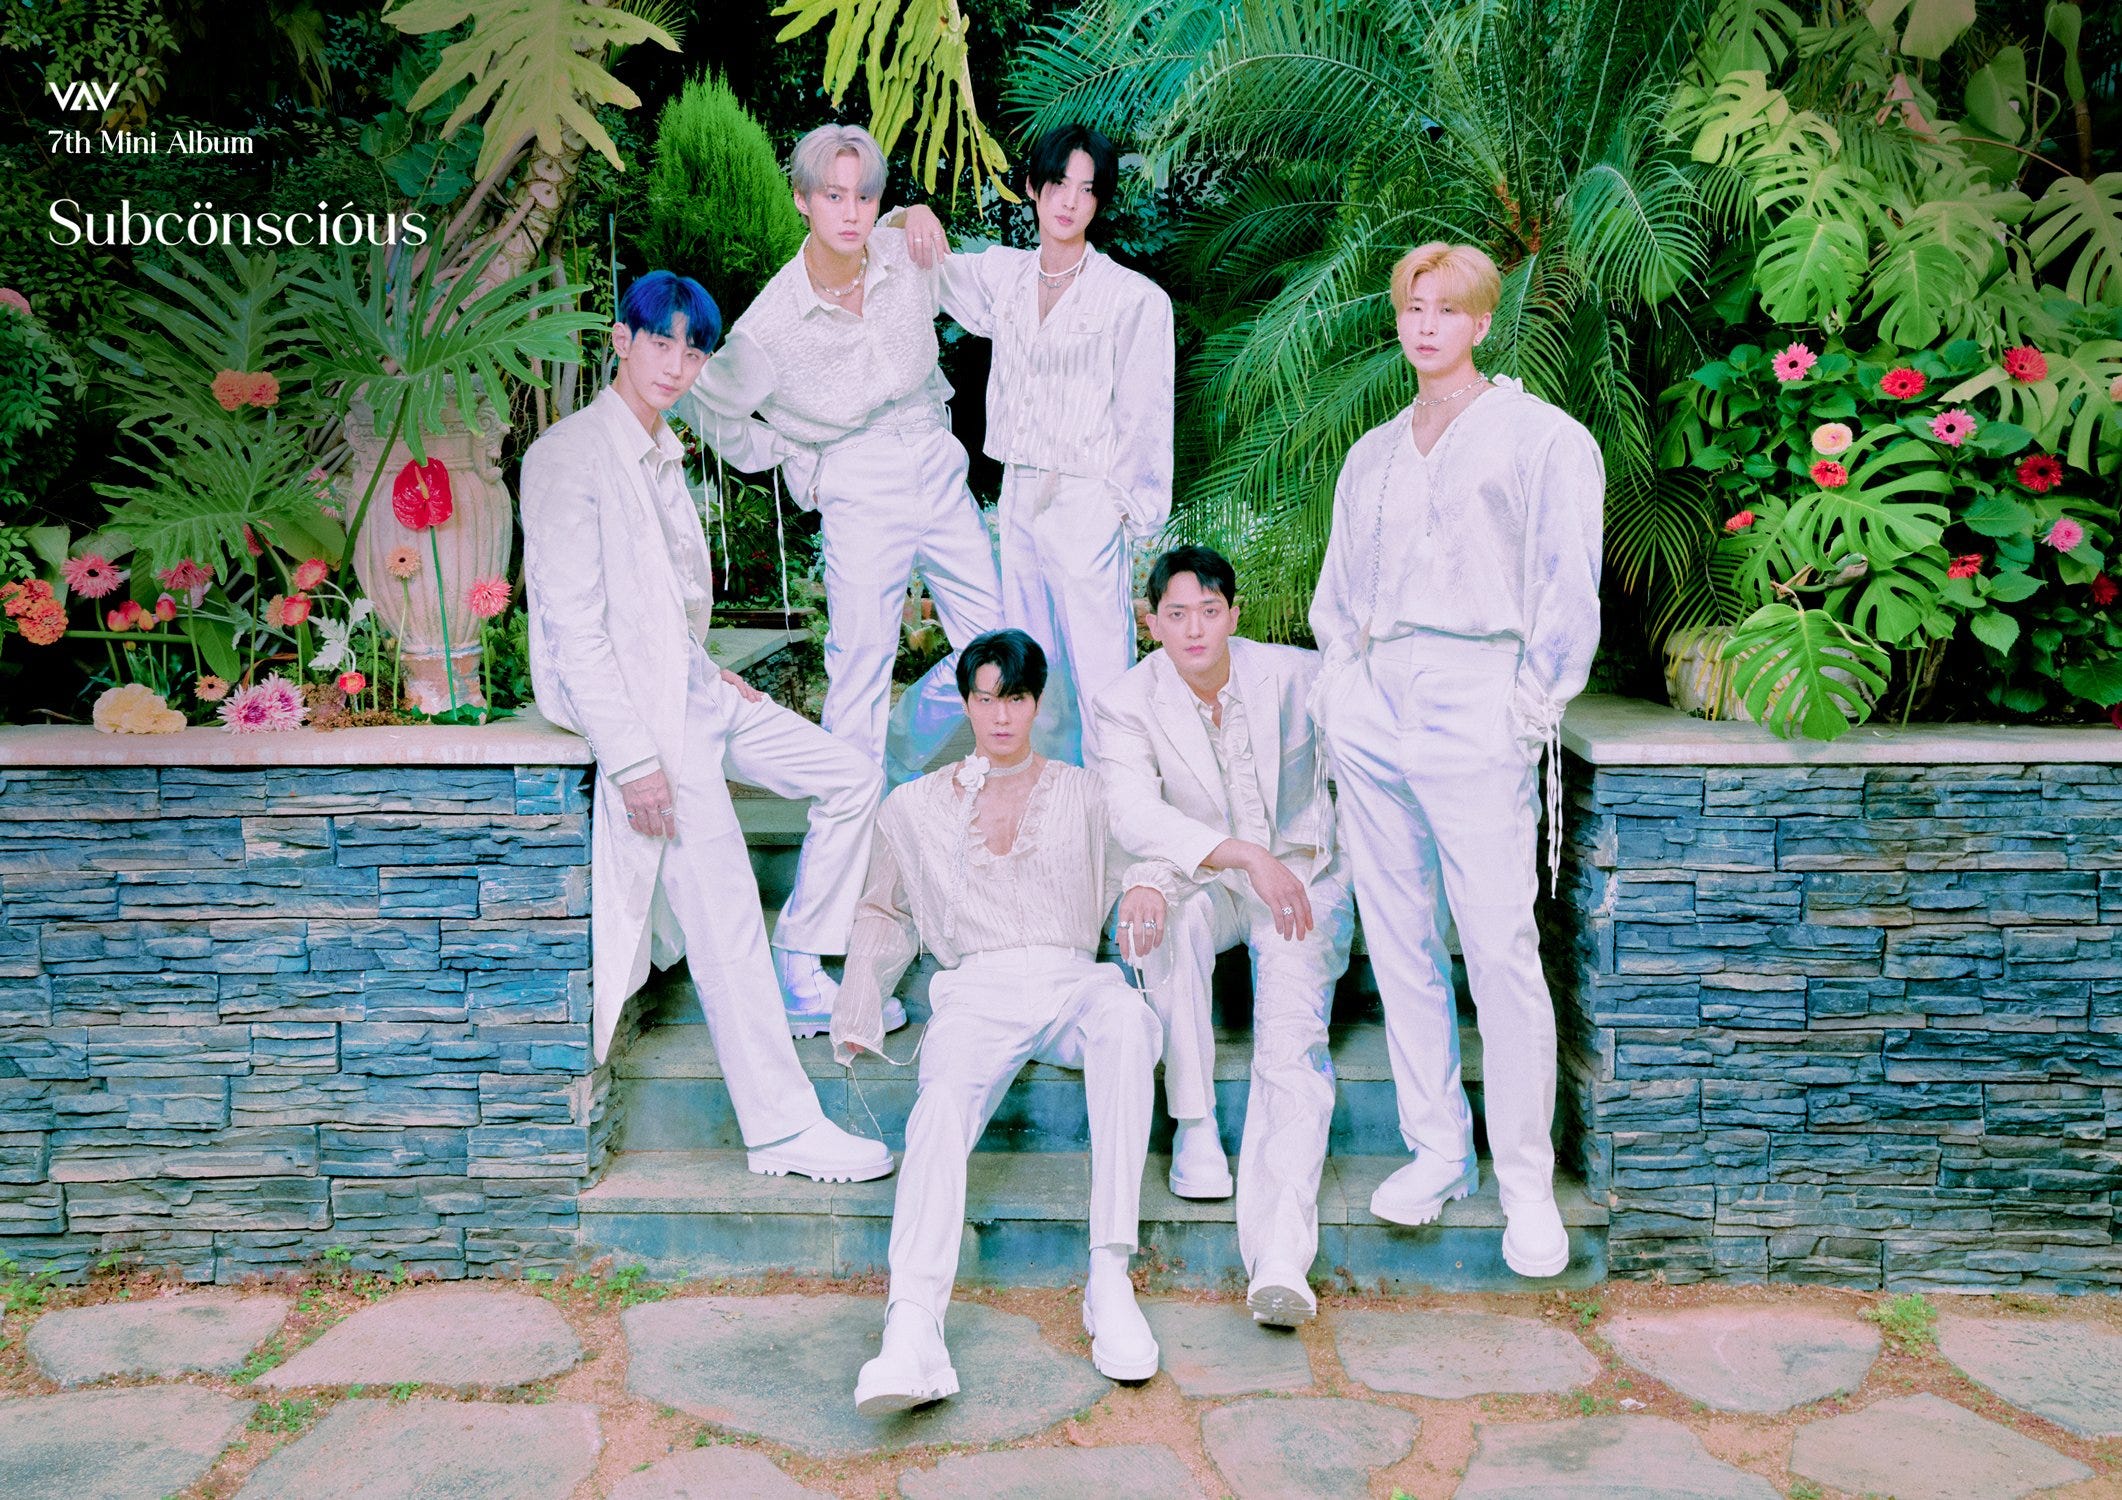 VAV promotional image, members posing on a blue brick wall surrounded by tropical foliage, wearing white outfits.